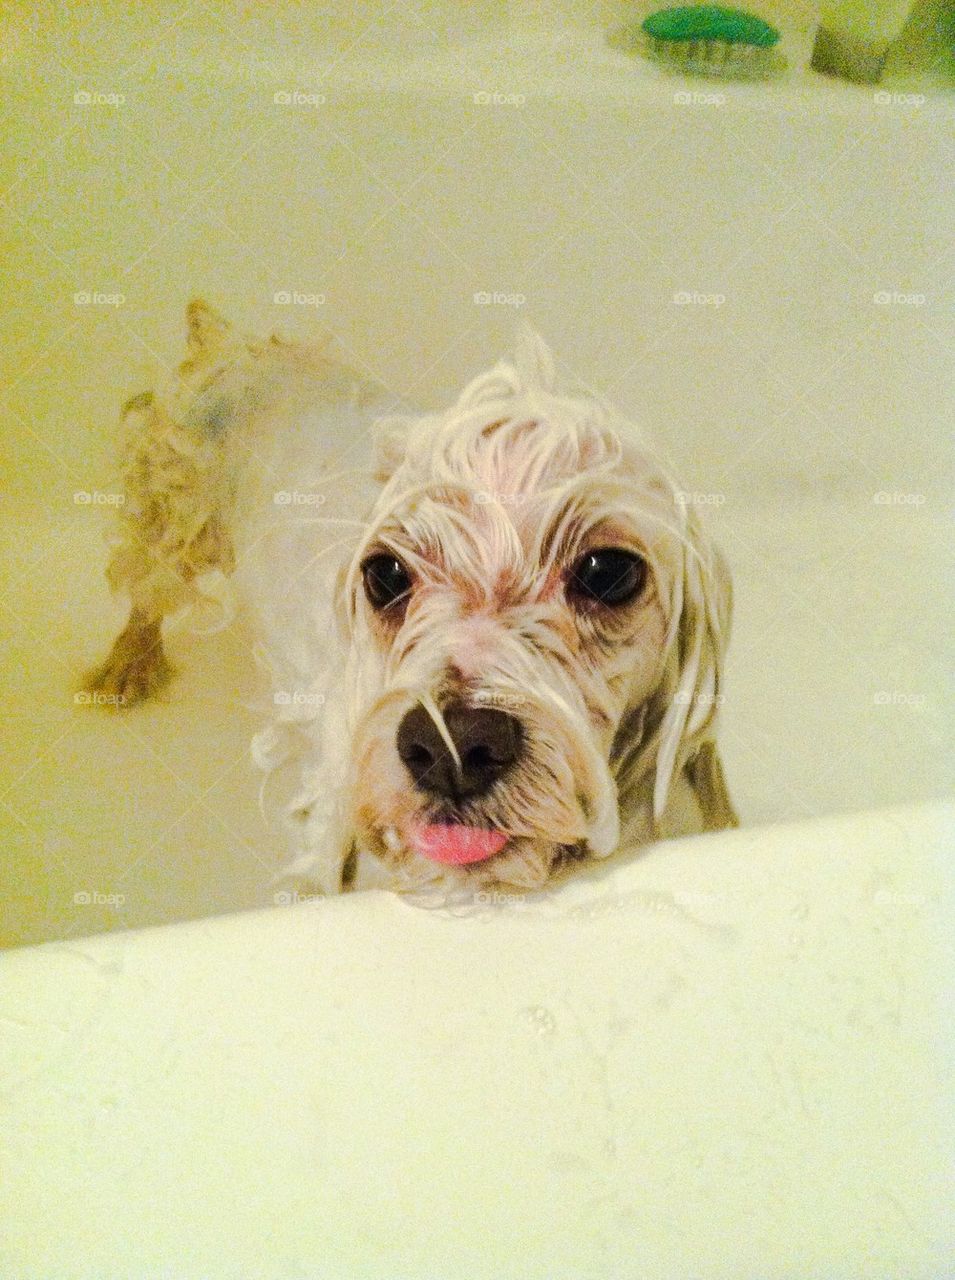 Wet dog with his tongue out.